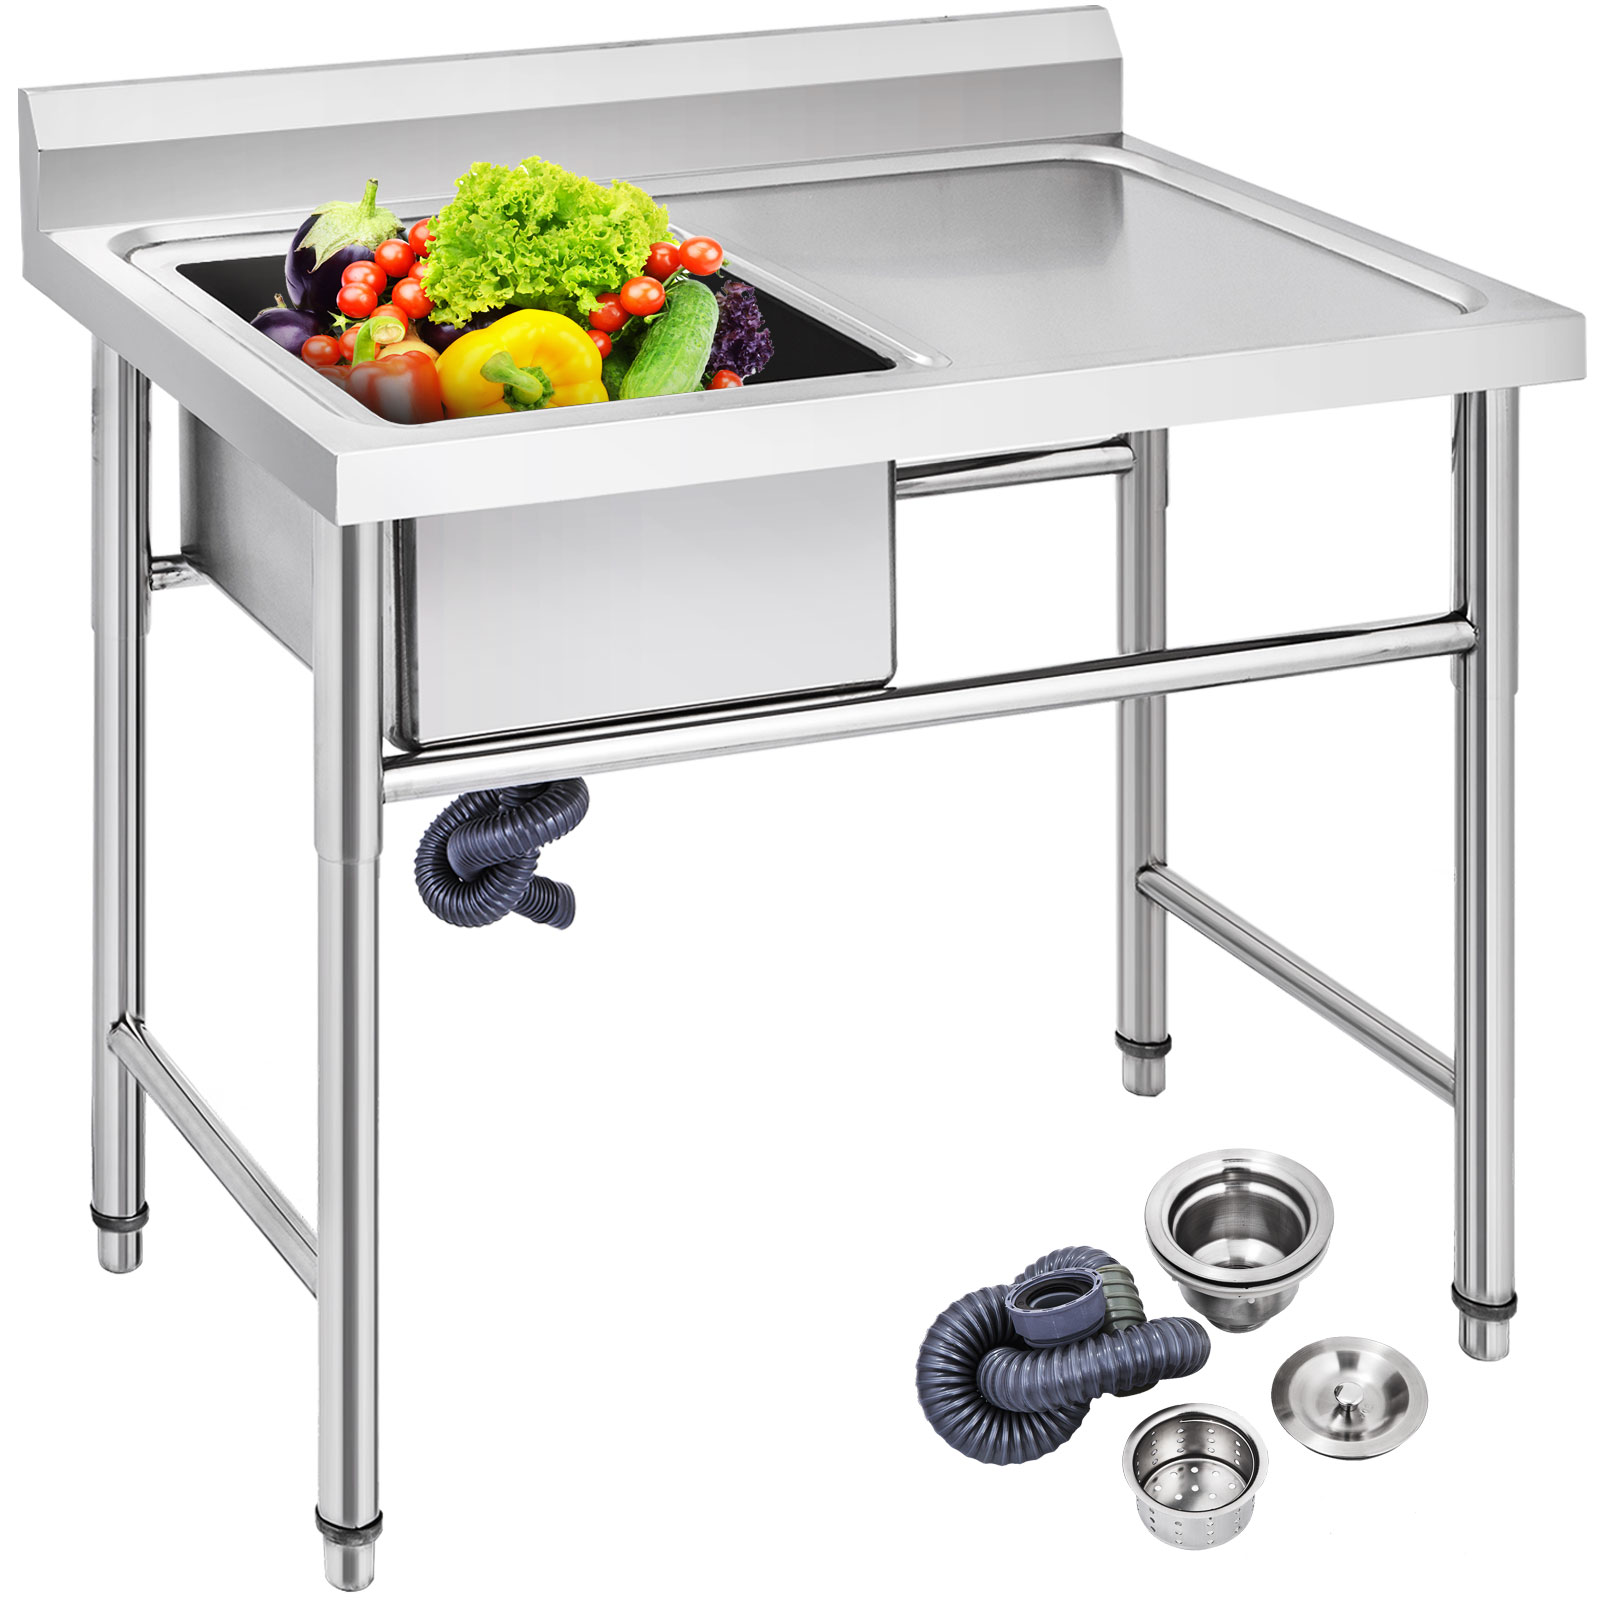 2 Compartment Stainless Steel Commercial Kitchen Prep & Utility Sink with Drainboard Expanded Size 47 x 33 x 17 Utility Sink 